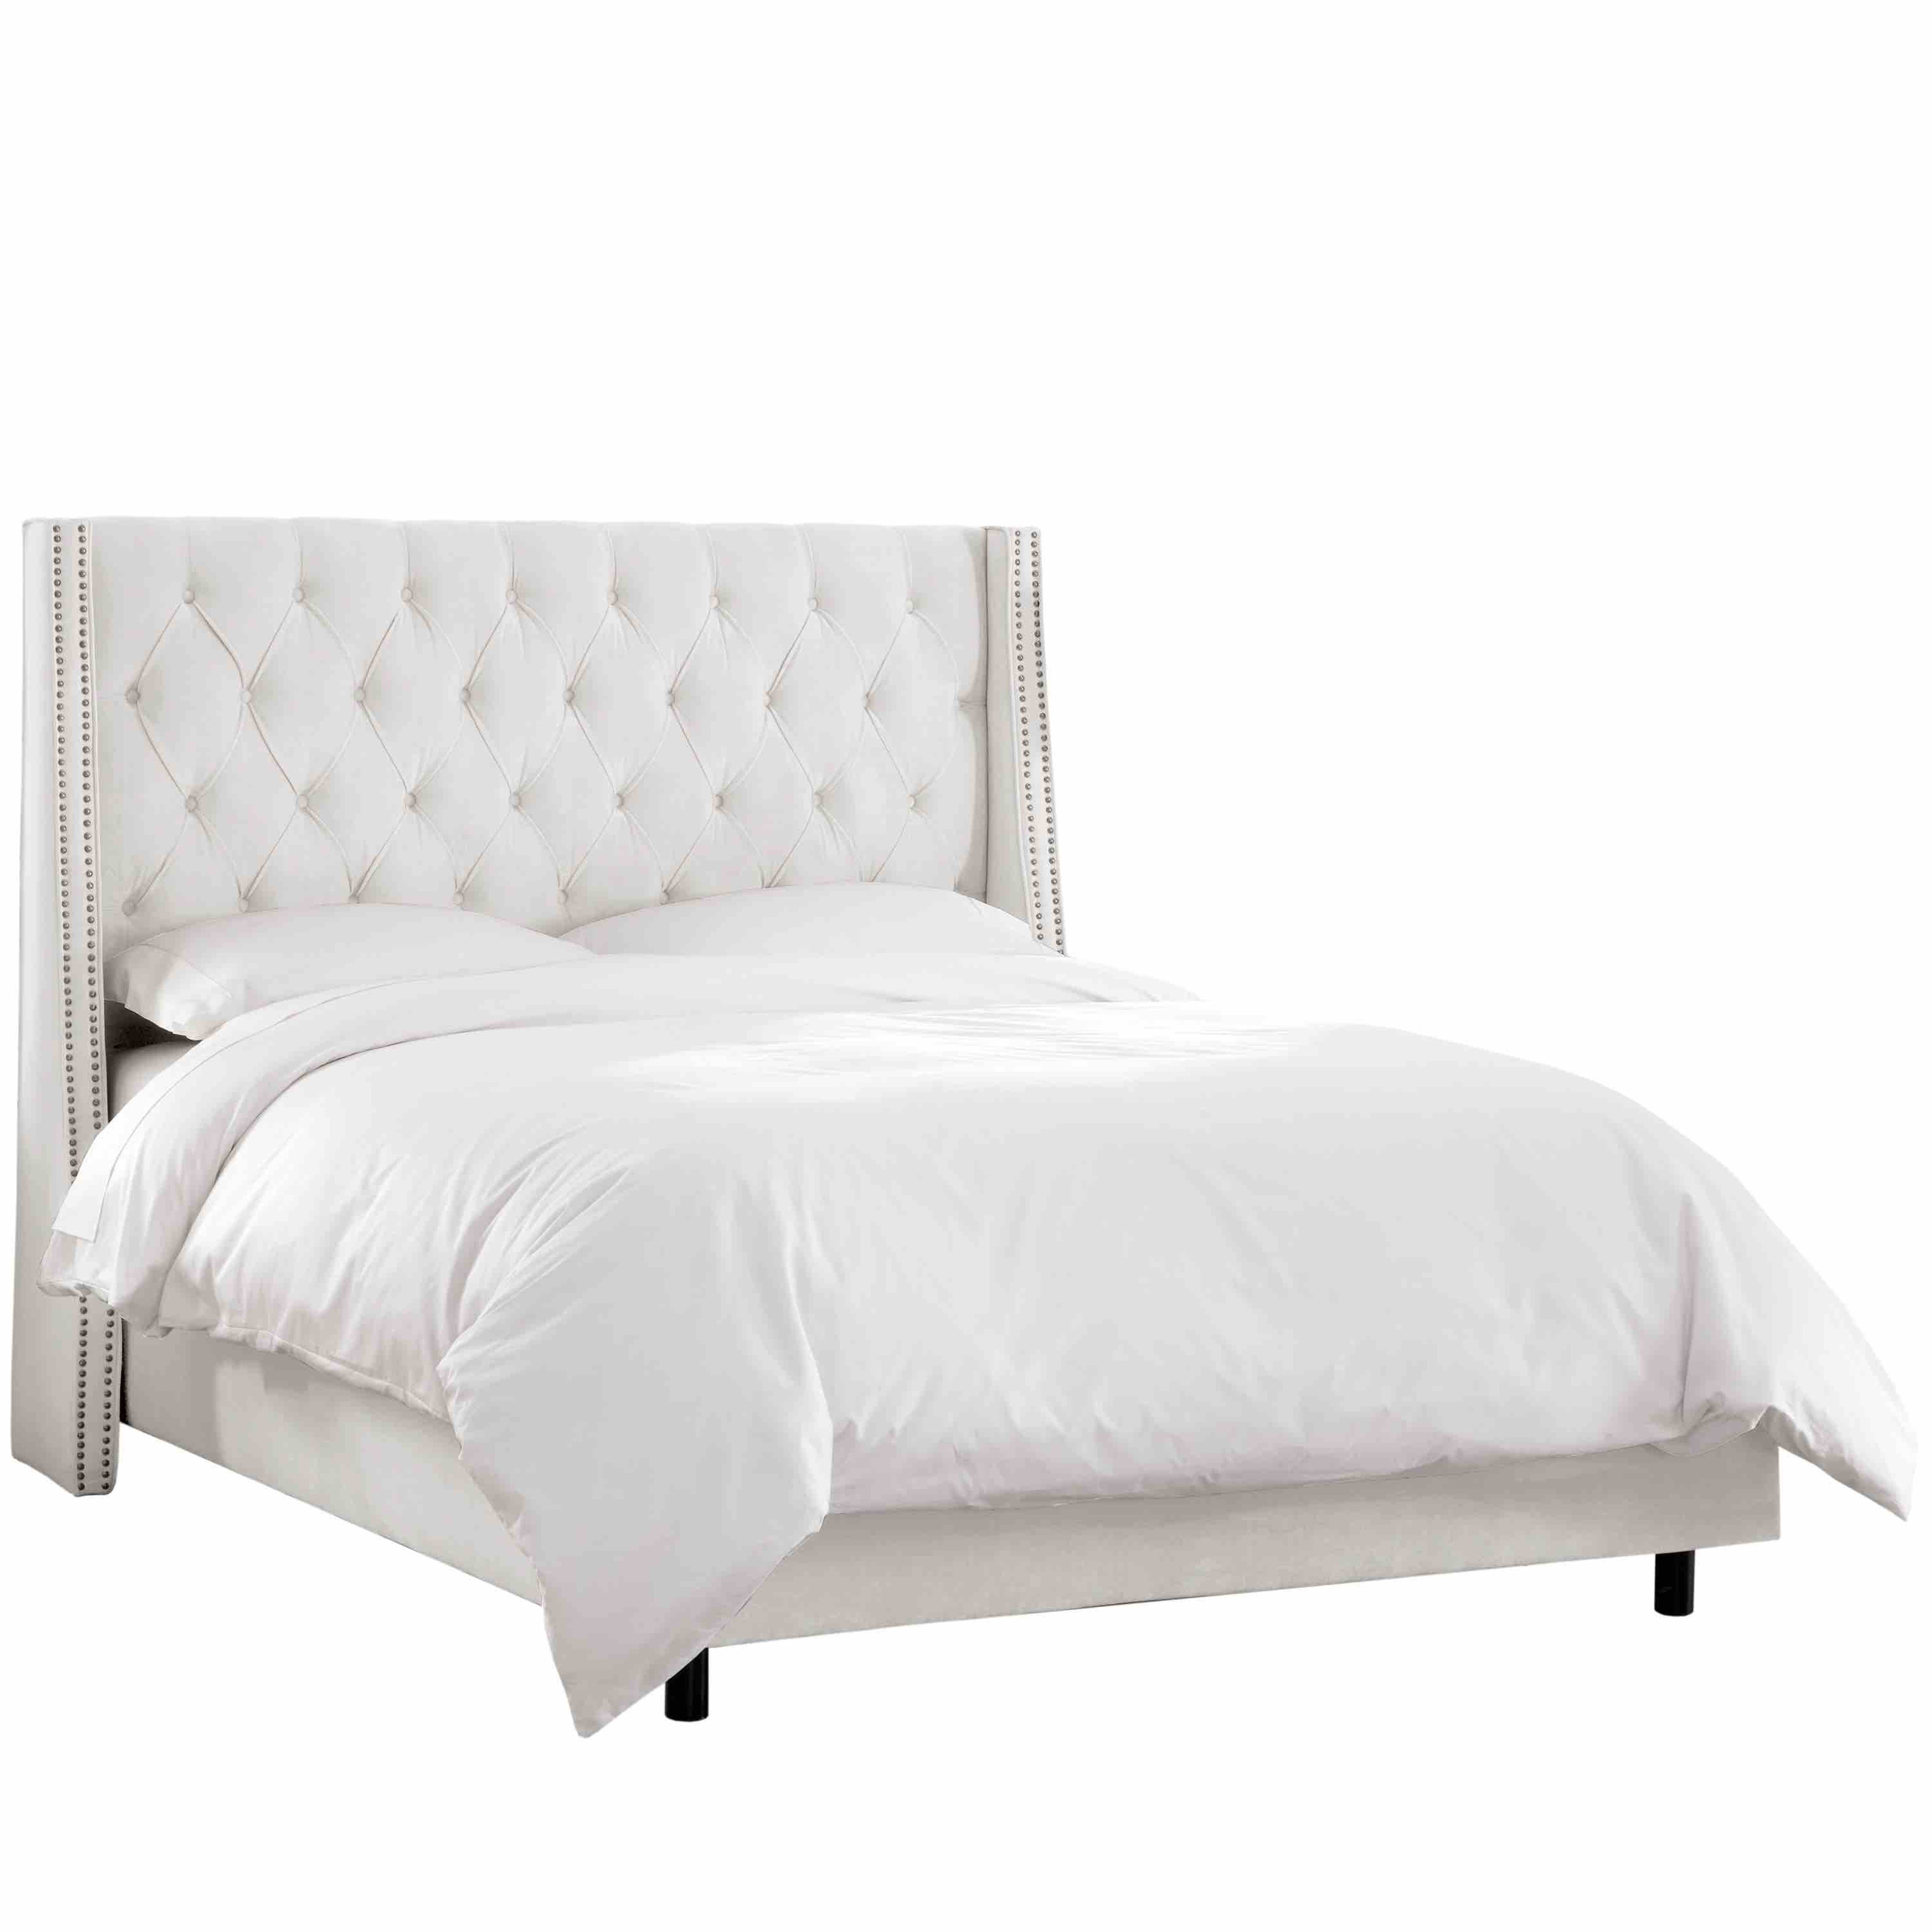 Queen Nail Button Tufted Wingback Bed in Velvet White - Third & Vine